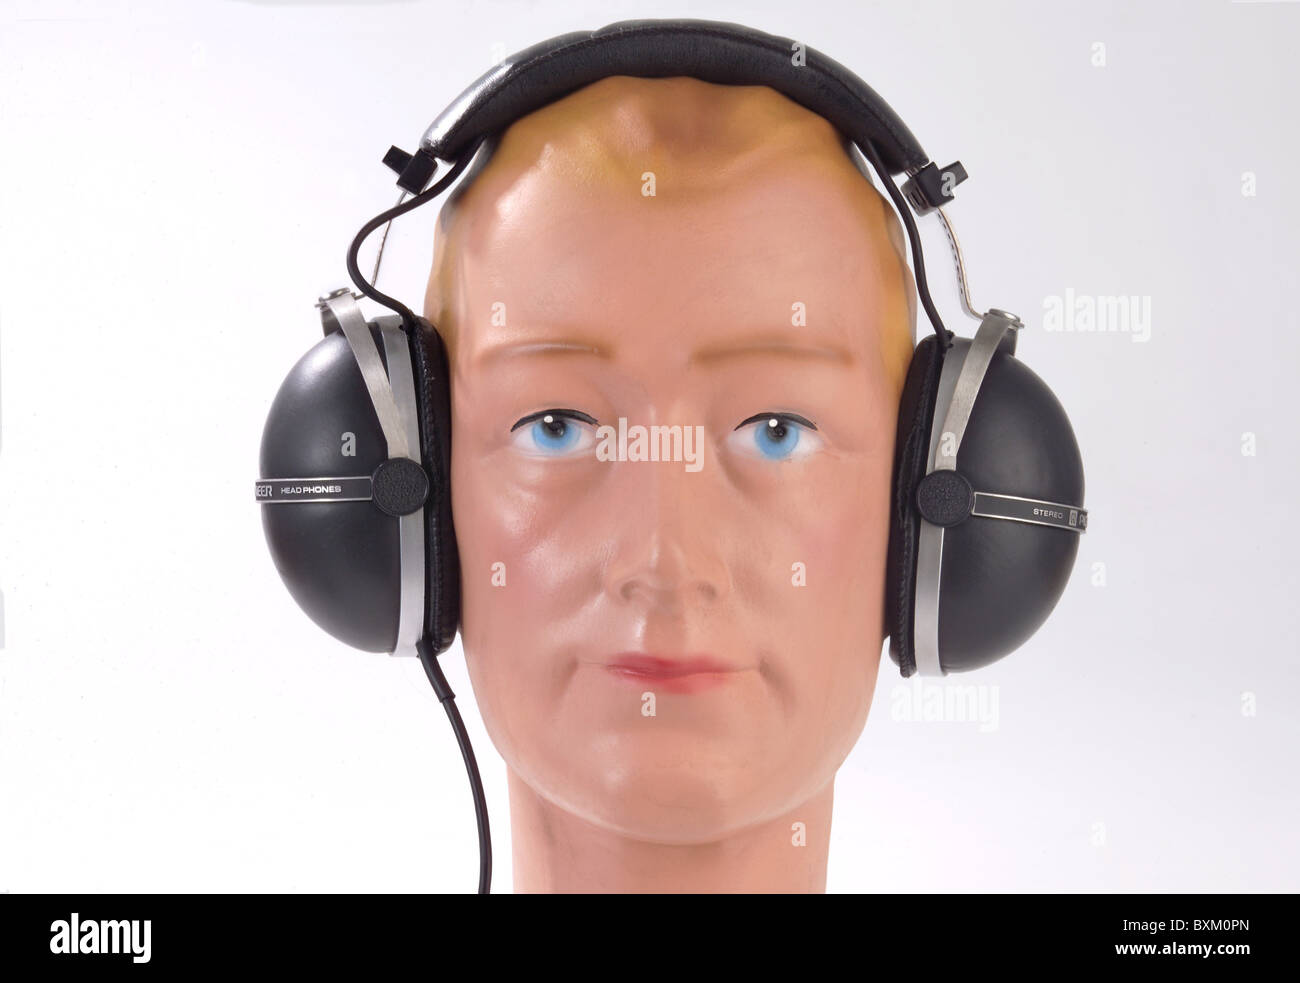 technics, Audio, man with stereo headphones, Pioneer SE-305,  Additional-Rights-Clearences-Not Available Stock Photo - Alamy